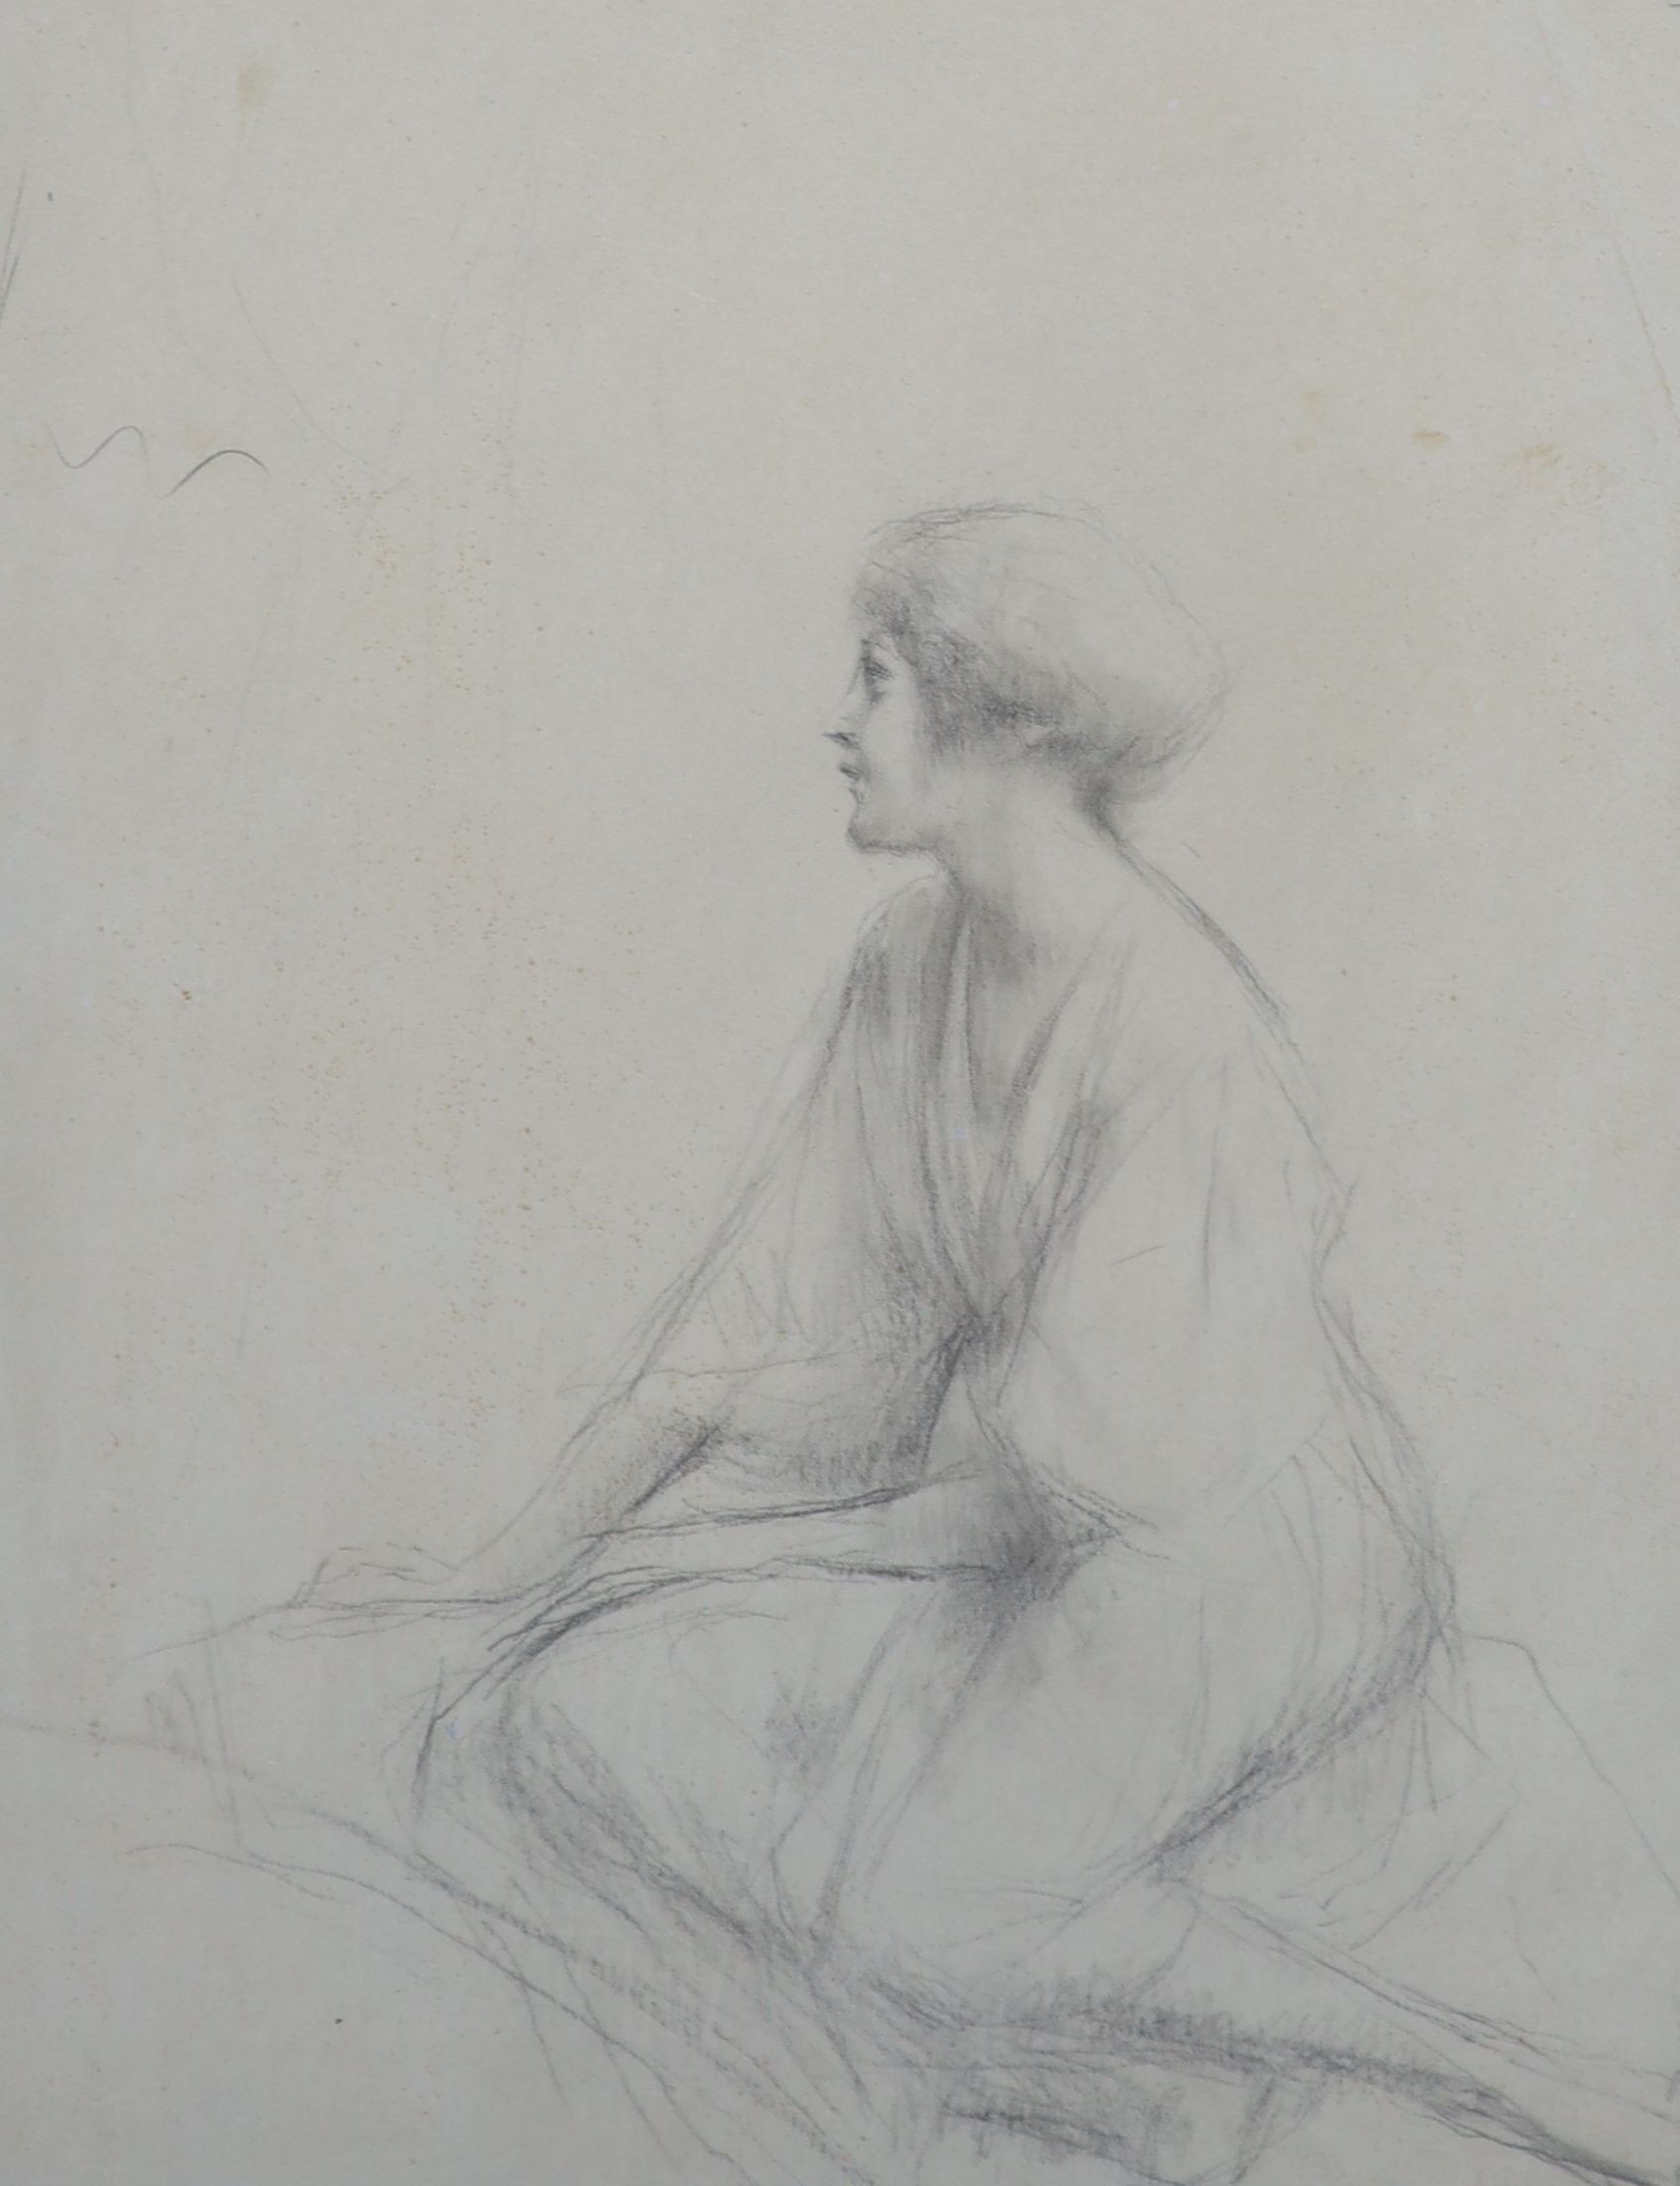 Attributed to Joseph Clark (1834-1926), two pencil drawings, Head and figure studies, largest 26 x 20cm